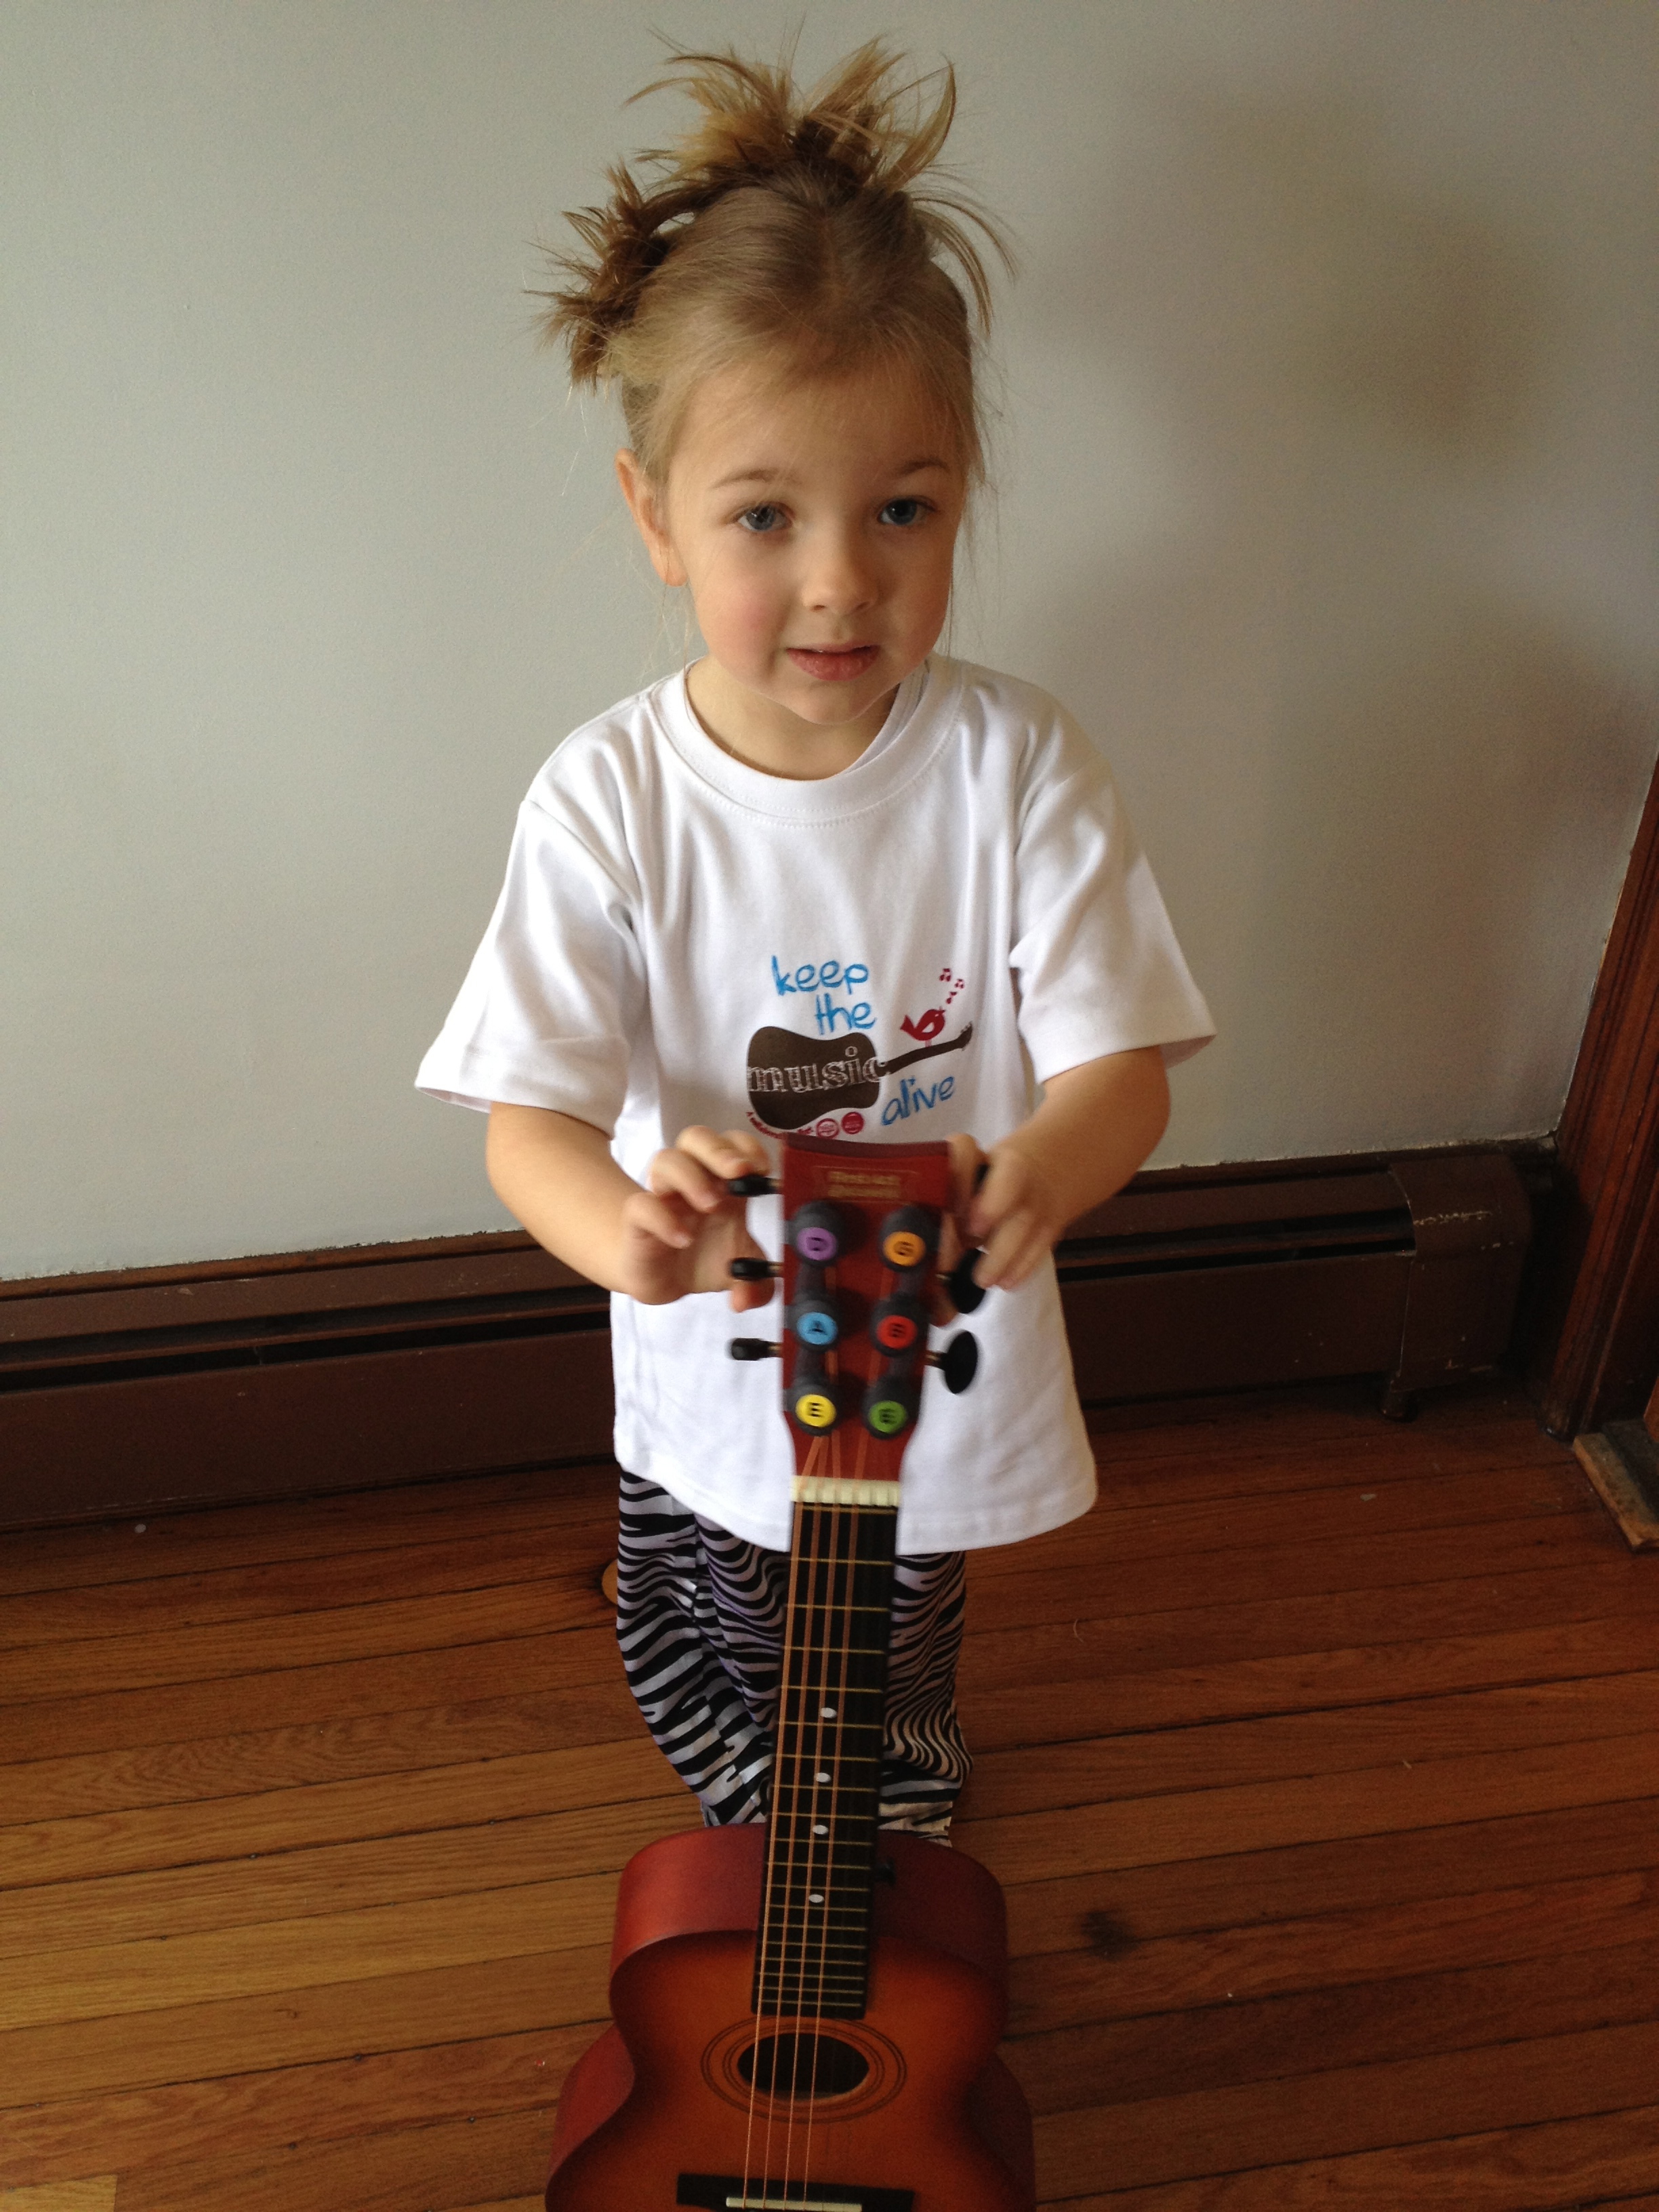 Eva Rocking the Keep The Music Alive Tee from Slick Sugar